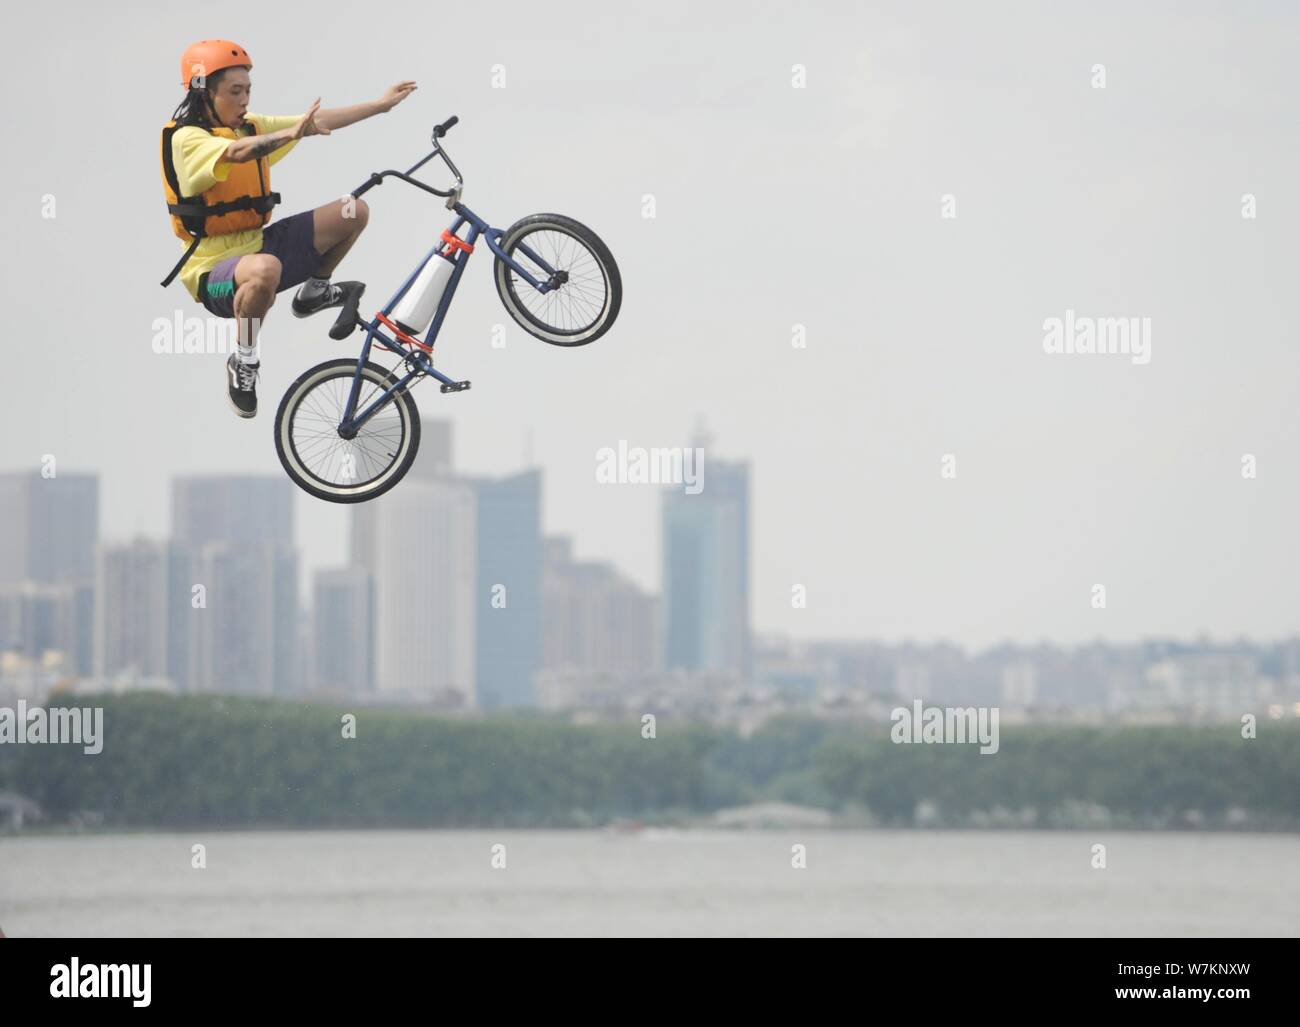 A BMX (Bicycle Motocross) rider jumps into the East Lake to cool off amid hot weather from a plank road during the 'Lake-jumping' festival in Wuhan ci Stock Photo